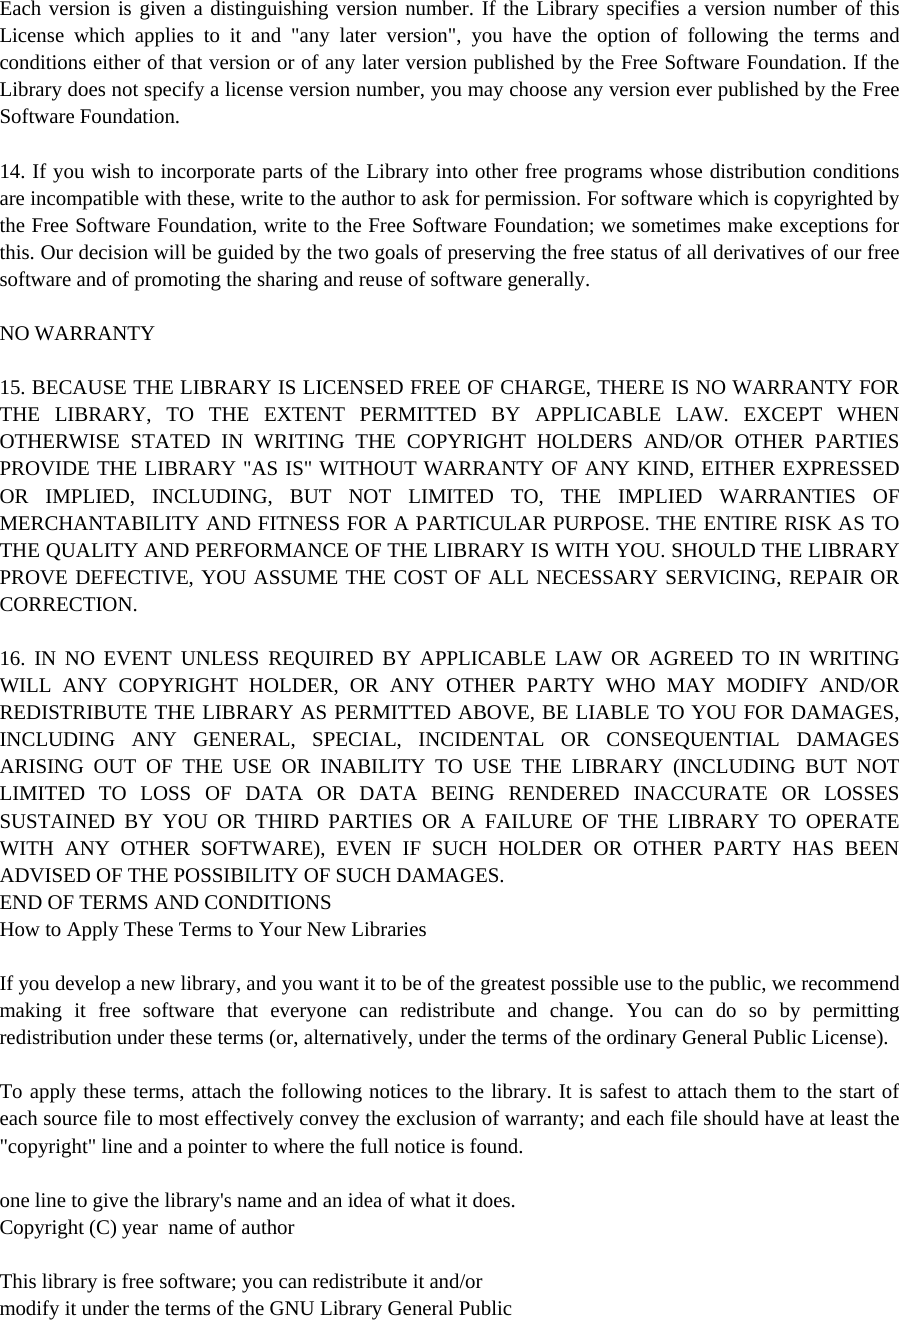 Each version is given a distinguishing version number. If the Library specifies a version number of this License which applies to it and &quot;any later version&quot;, you have the option of following the terms and conditions either of that version or of any later version published by the Free Software Foundation. If the Library does not specify a license version number, you may choose any version ever published by the Free Software Foundation.  14. If you wish to incorporate parts of the Library into other free programs whose distribution conditions are incompatible with these, write to the author to ask for permission. For software which is copyrighted by the Free Software Foundation, write to the Free Software Foundation; we sometimes make exceptions for this. Our decision will be guided by the two goals of preserving the free status of all derivatives of our free software and of promoting the sharing and reuse of software generally.  NO WARRANTY  15. BECAUSE THE LIBRARY IS LICENSED FREE OF CHARGE, THERE IS NO WARRANTY FOR THE LIBRARY, TO THE EXTENT PERMITTED BY APPLICABLE LAW. EXCEPT WHEN OTHERWISE STATED IN WRITING THE COPYRIGHT HOLDERS AND/OR OTHER PARTIES PROVIDE THE LIBRARY &quot;AS IS&quot; WITHOUT WARRANTY OF ANY KIND, EITHER EXPRESSED OR IMPLIED, INCLUDING, BUT NOT LIMITED TO, THE IMPLIED WARRANTIES OF MERCHANTABILITY AND FITNESS FOR A PARTICULAR PURPOSE. THE ENTIRE RISK AS TO THE QUALITY AND PERFORMANCE OF THE LIBRARY IS WITH YOU. SHOULD THE LIBRARY PROVE DEFECTIVE, YOU ASSUME THE COST OF ALL NECESSARY SERVICING, REPAIR OR CORRECTION.  16. IN NO EVENT UNLESS REQUIRED BY APPLICABLE LAW OR AGREED TO IN WRITING WILL ANY COPYRIGHT HOLDER, OR ANY OTHER PARTY WHO MAY MODIFY AND/OR REDISTRIBUTE THE LIBRARY AS PERMITTED ABOVE, BE LIABLE TO YOU FOR DAMAGES, INCLUDING ANY GENERAL, SPECIAL, INCIDENTAL OR CONSEQUENTIAL DAMAGES ARISING OUT OF THE USE OR INABILITY TO USE THE LIBRARY (INCLUDING BUT NOT LIMITED TO LOSS OF DATA OR DATA BEING RENDERED INACCURATE OR LOSSES SUSTAINED BY YOU OR THIRD PARTIES OR A FAILURE OF THE LIBRARY TO OPERATE WITH ANY OTHER SOFTWARE), EVEN IF SUCH HOLDER OR OTHER PARTY HAS BEEN ADVISED OF THE POSSIBILITY OF SUCH DAMAGES. END OF TERMS AND CONDITIONS How to Apply These Terms to Your New Libraries  If you develop a new library, and you want it to be of the greatest possible use to the public, we recommend making it free software that everyone can redistribute and change. You can do so by permitting redistribution under these terms (or, alternatively, under the terms of the ordinary General Public License).  To apply these terms, attach the following notices to the library. It is safest to attach them to the start of each source file to most effectively convey the exclusion of warranty; and each file should have at least the &quot;copyright&quot; line and a pointer to where the full notice is found.  one line to give the library&apos;s name and an idea of what it does. Copyright (C) year  name of author  This library is free software; you can redistribute it and/or modify it under the terms of the GNU Library General Public 